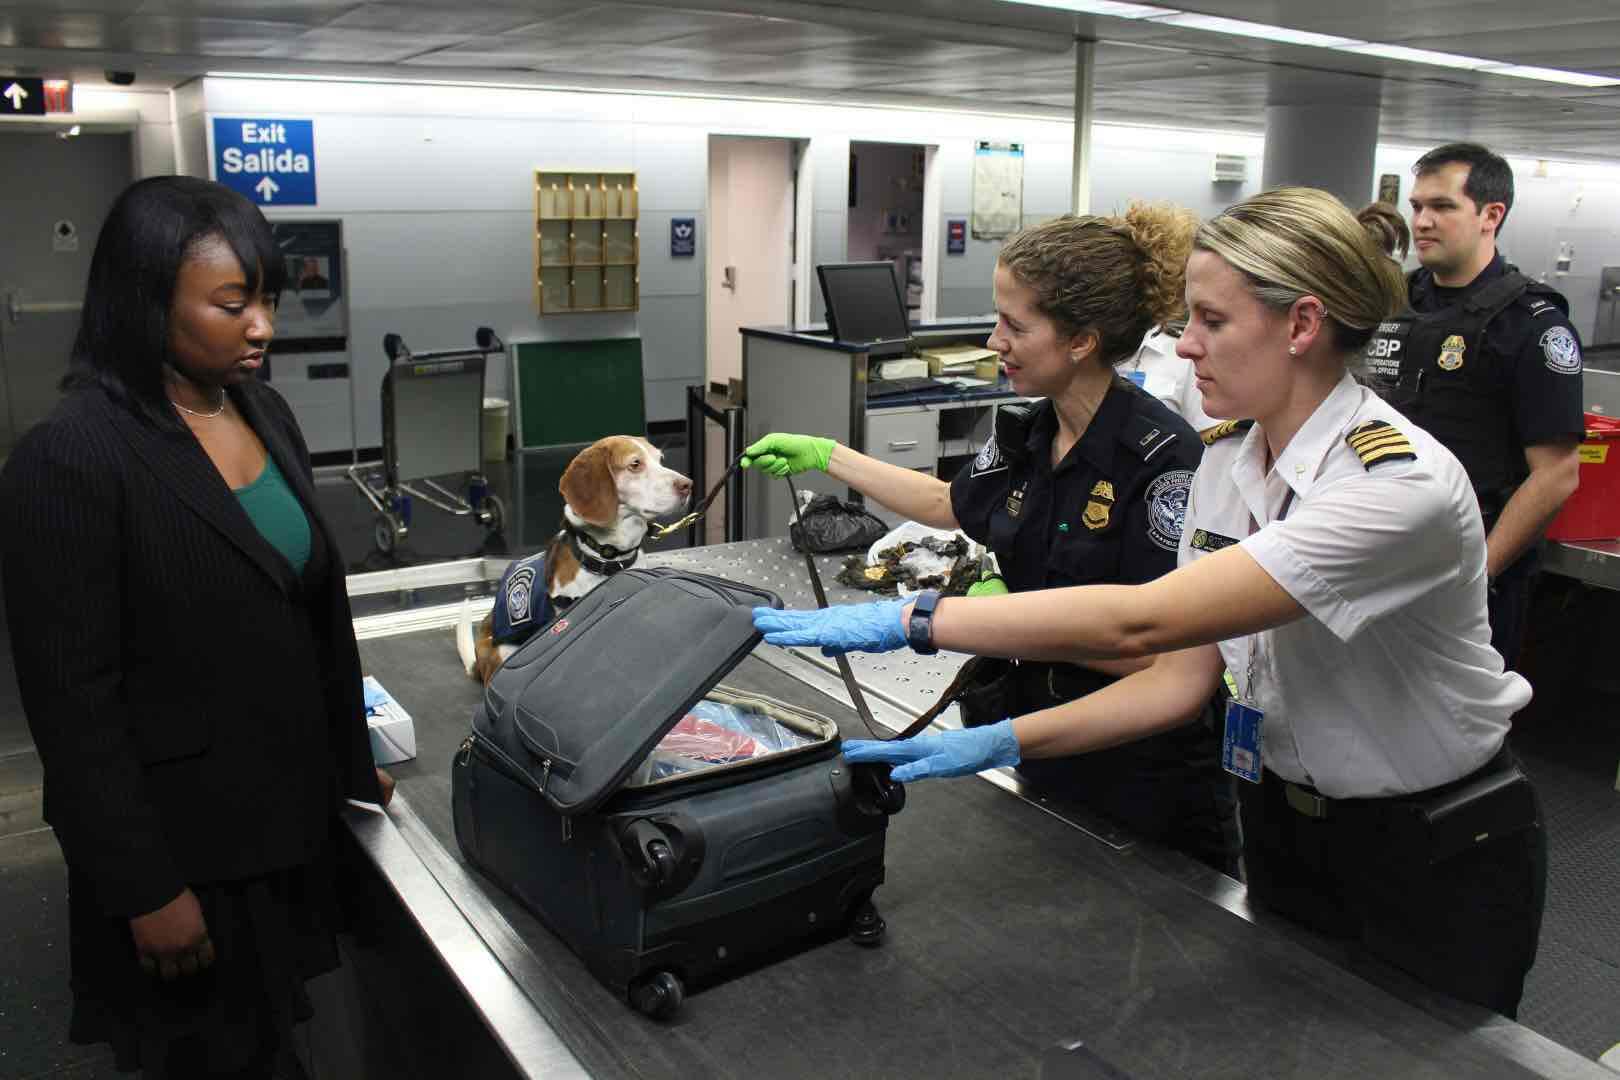 Luggage being checked at TSA security